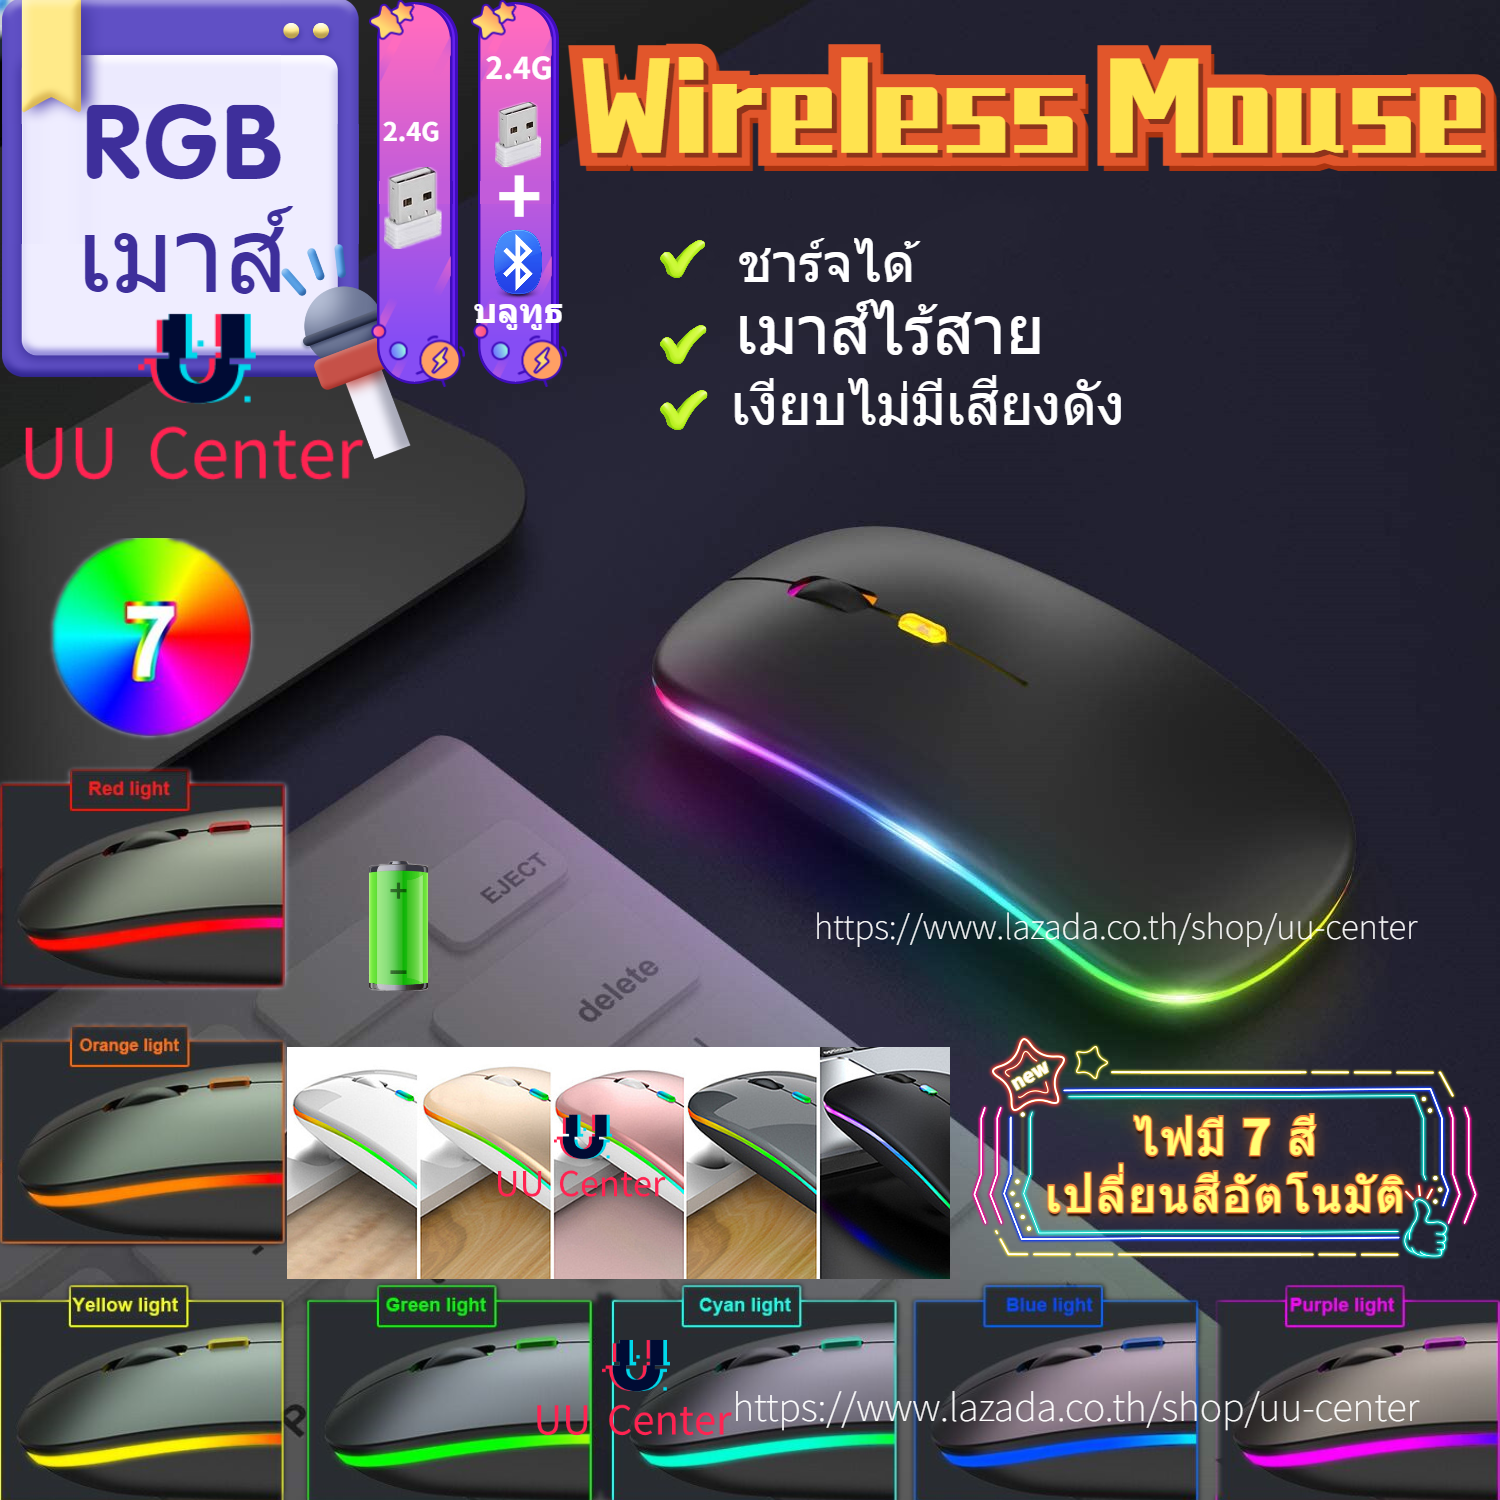 ?UU?[Wireless mouse]2.4G wireless mouse/rechargeable mouse/mice/เมาส์ไร้สาย for laptop/computer/mobile mouse/mice 2.4GHz Wireless Silent Mouse RGB Backlight DPI 1000-1600 M1